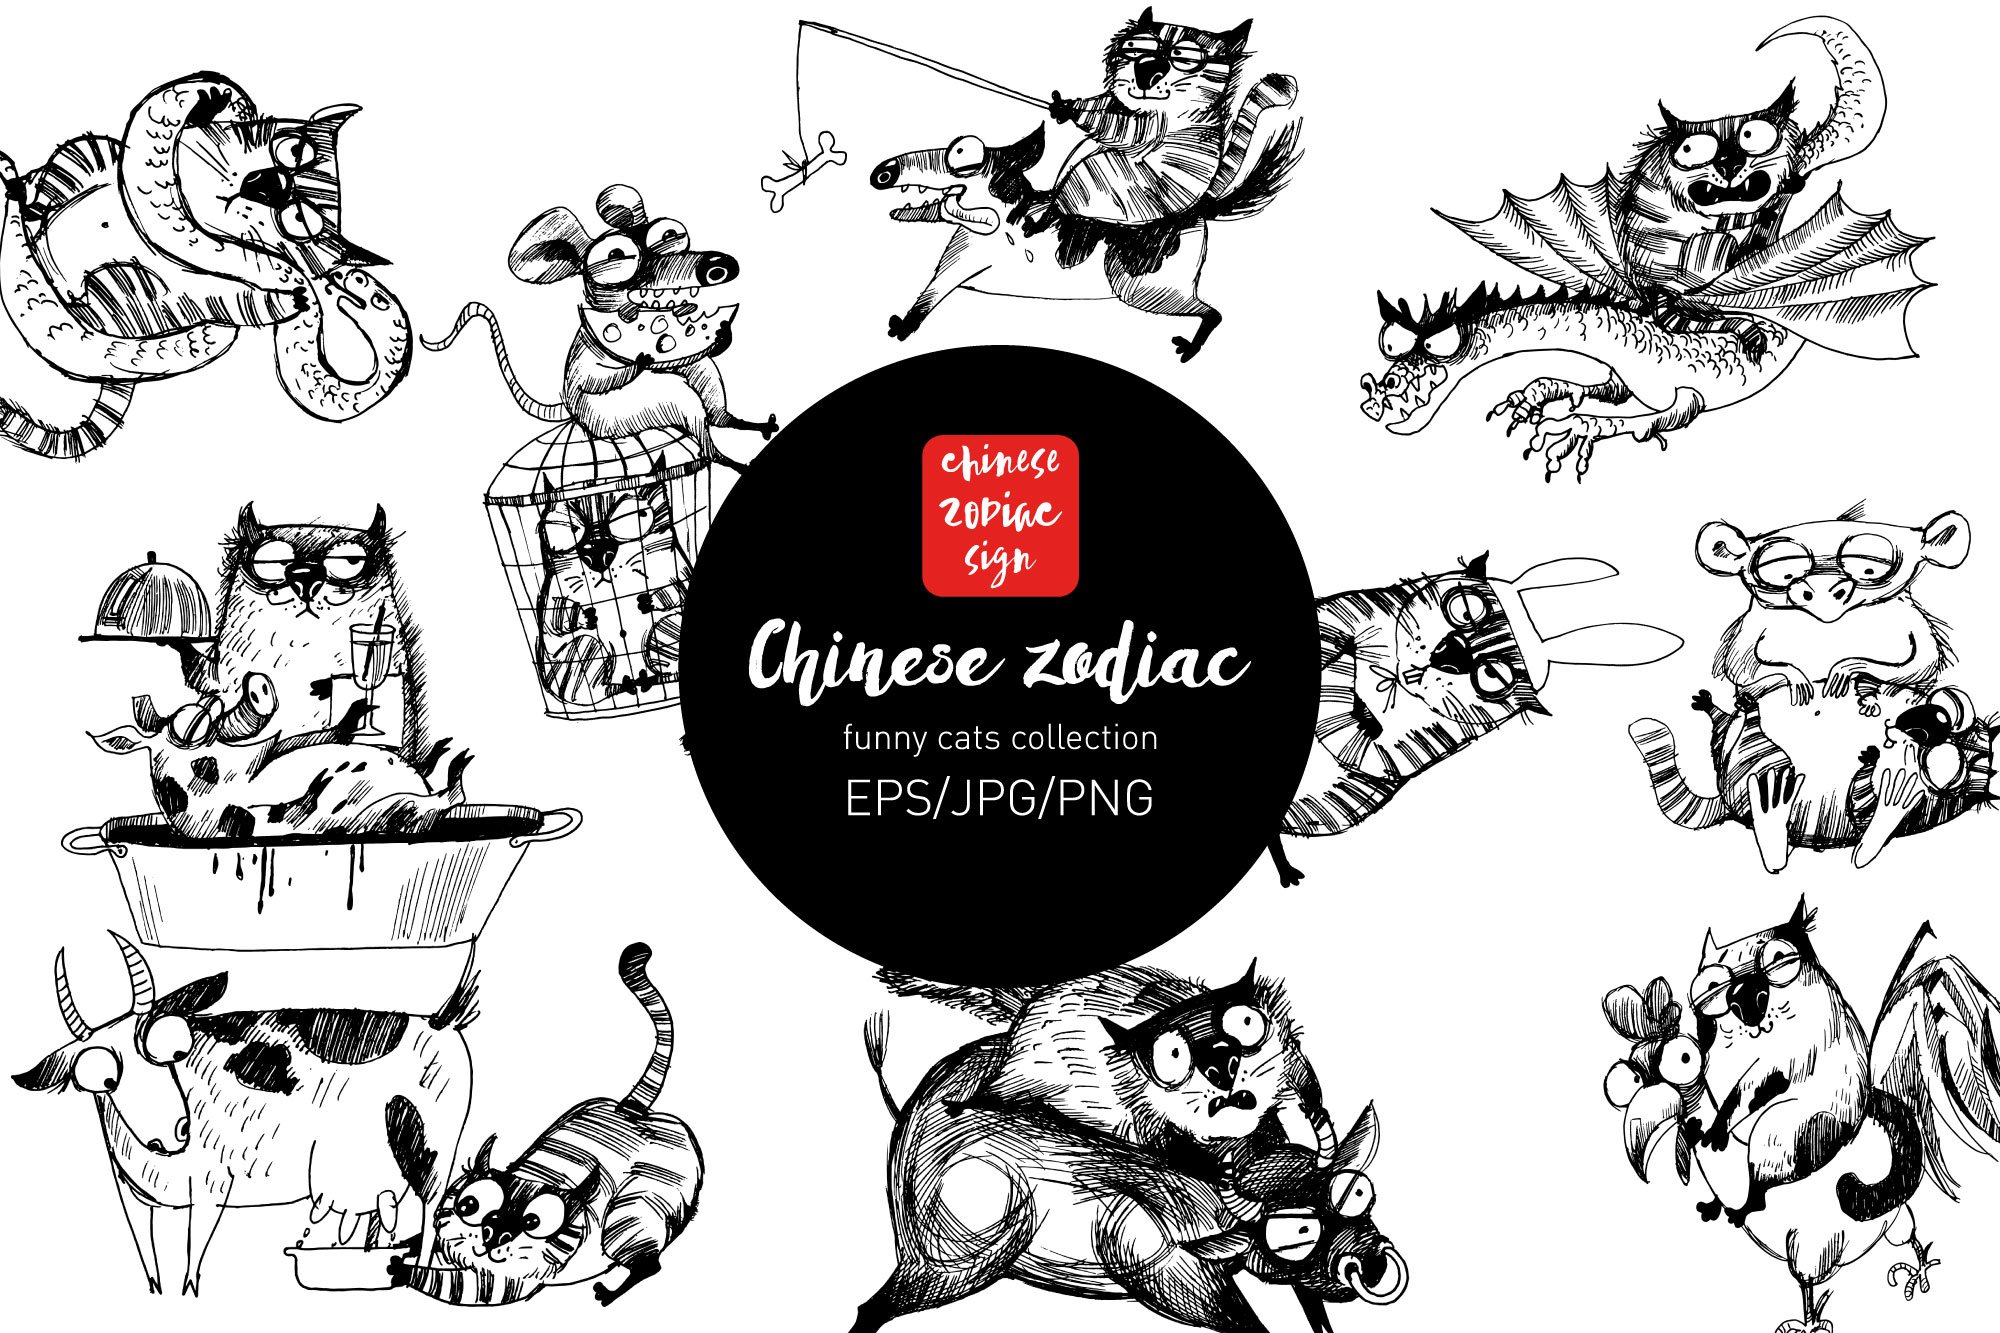 Chinese zodiac as funny cats cover image.